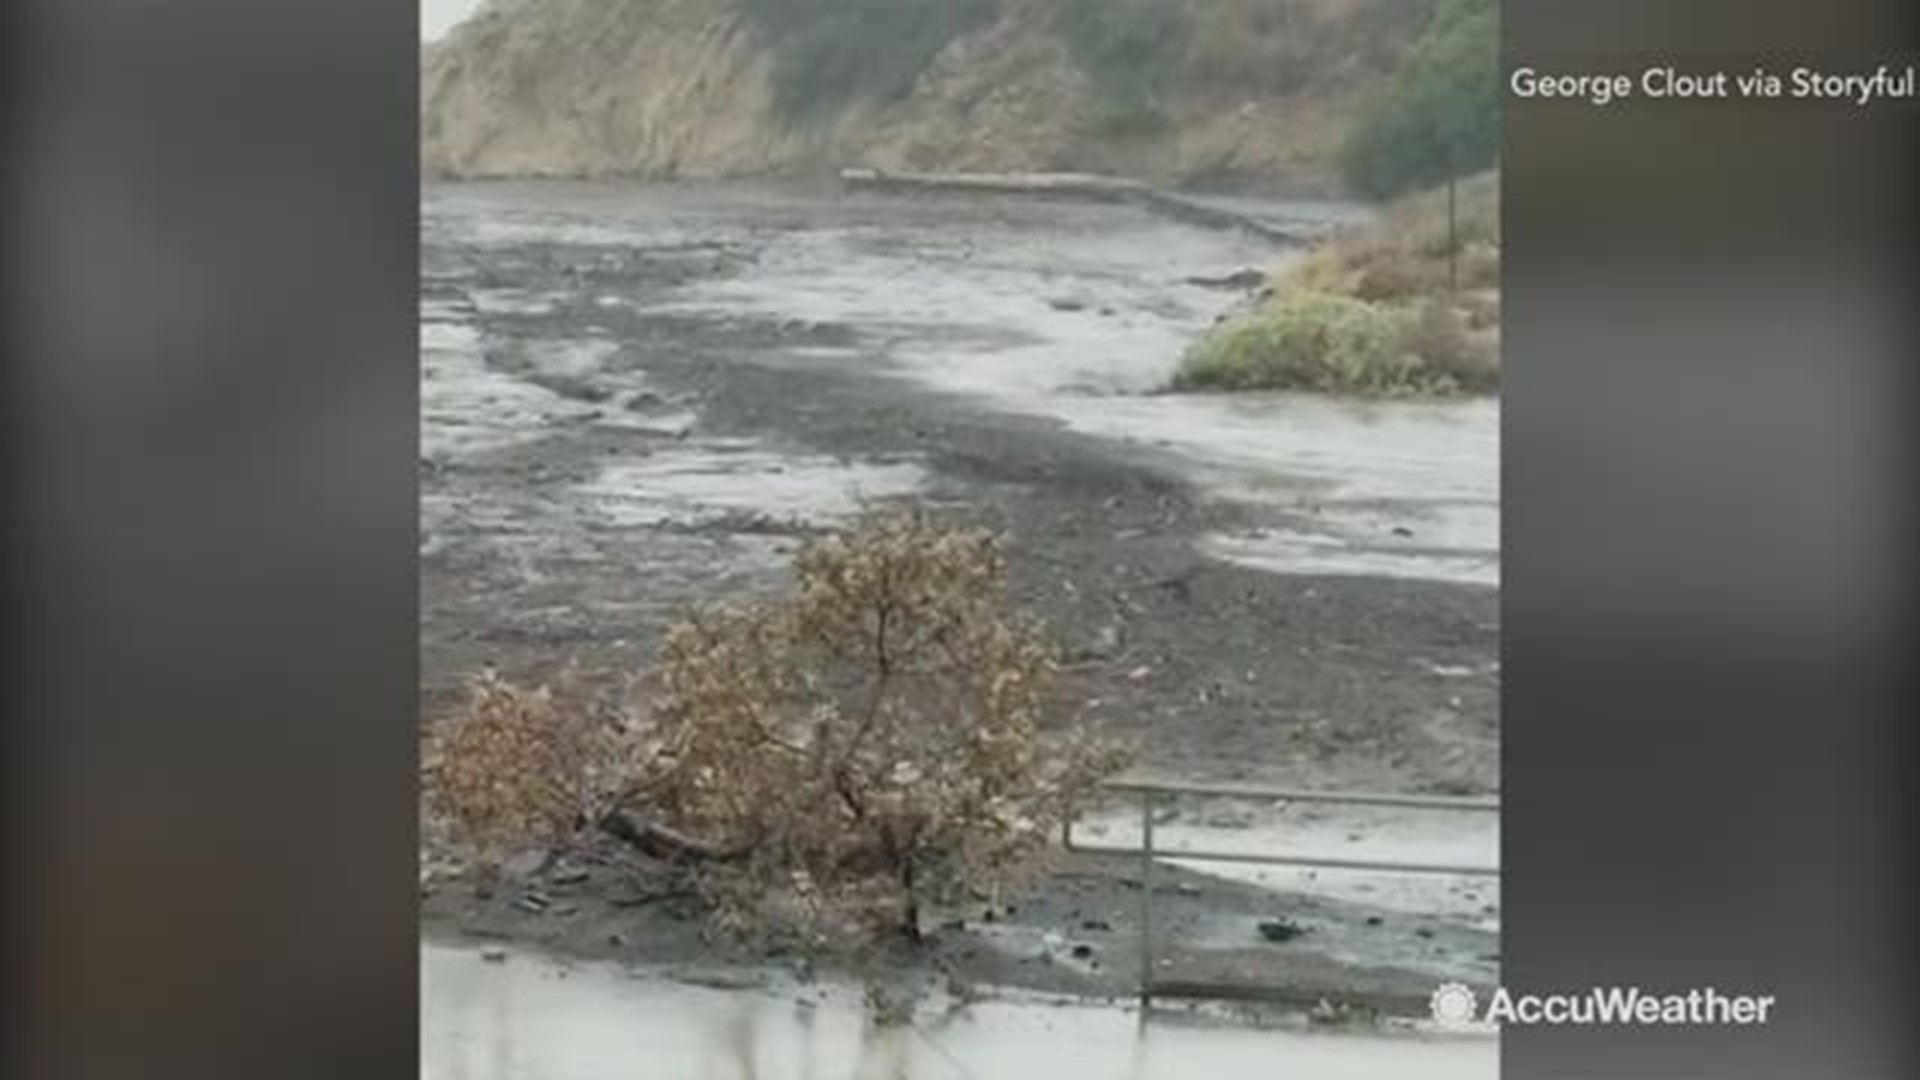 Mud and water poured down off the burn scar area near Malibu, California and ran into the ocean at Leo Carrillo State Park. The waves were turned black from the water running off the burn scar from the Woolsey fire. A section of the Pacific Coast Highway